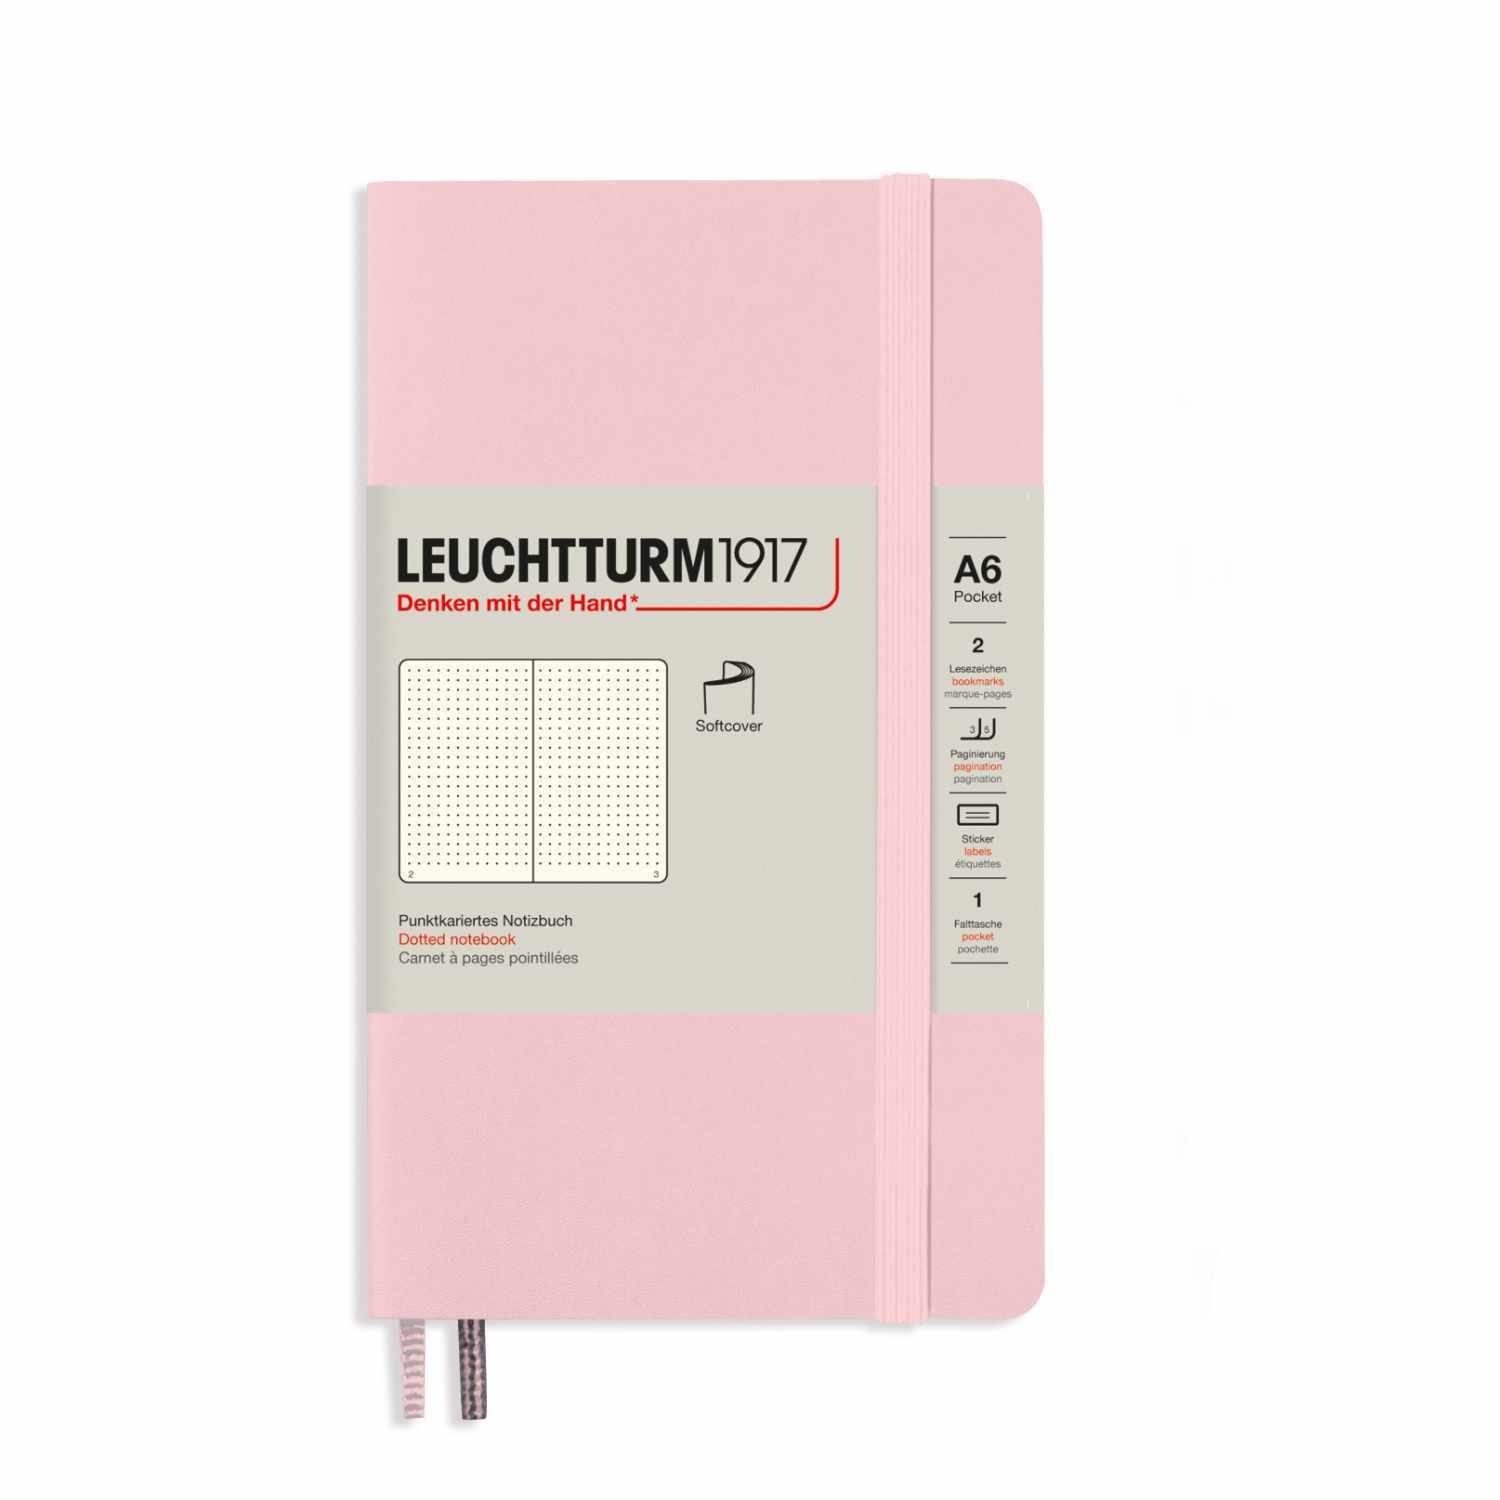 Notizbuch Pocket dotted Softcover A6